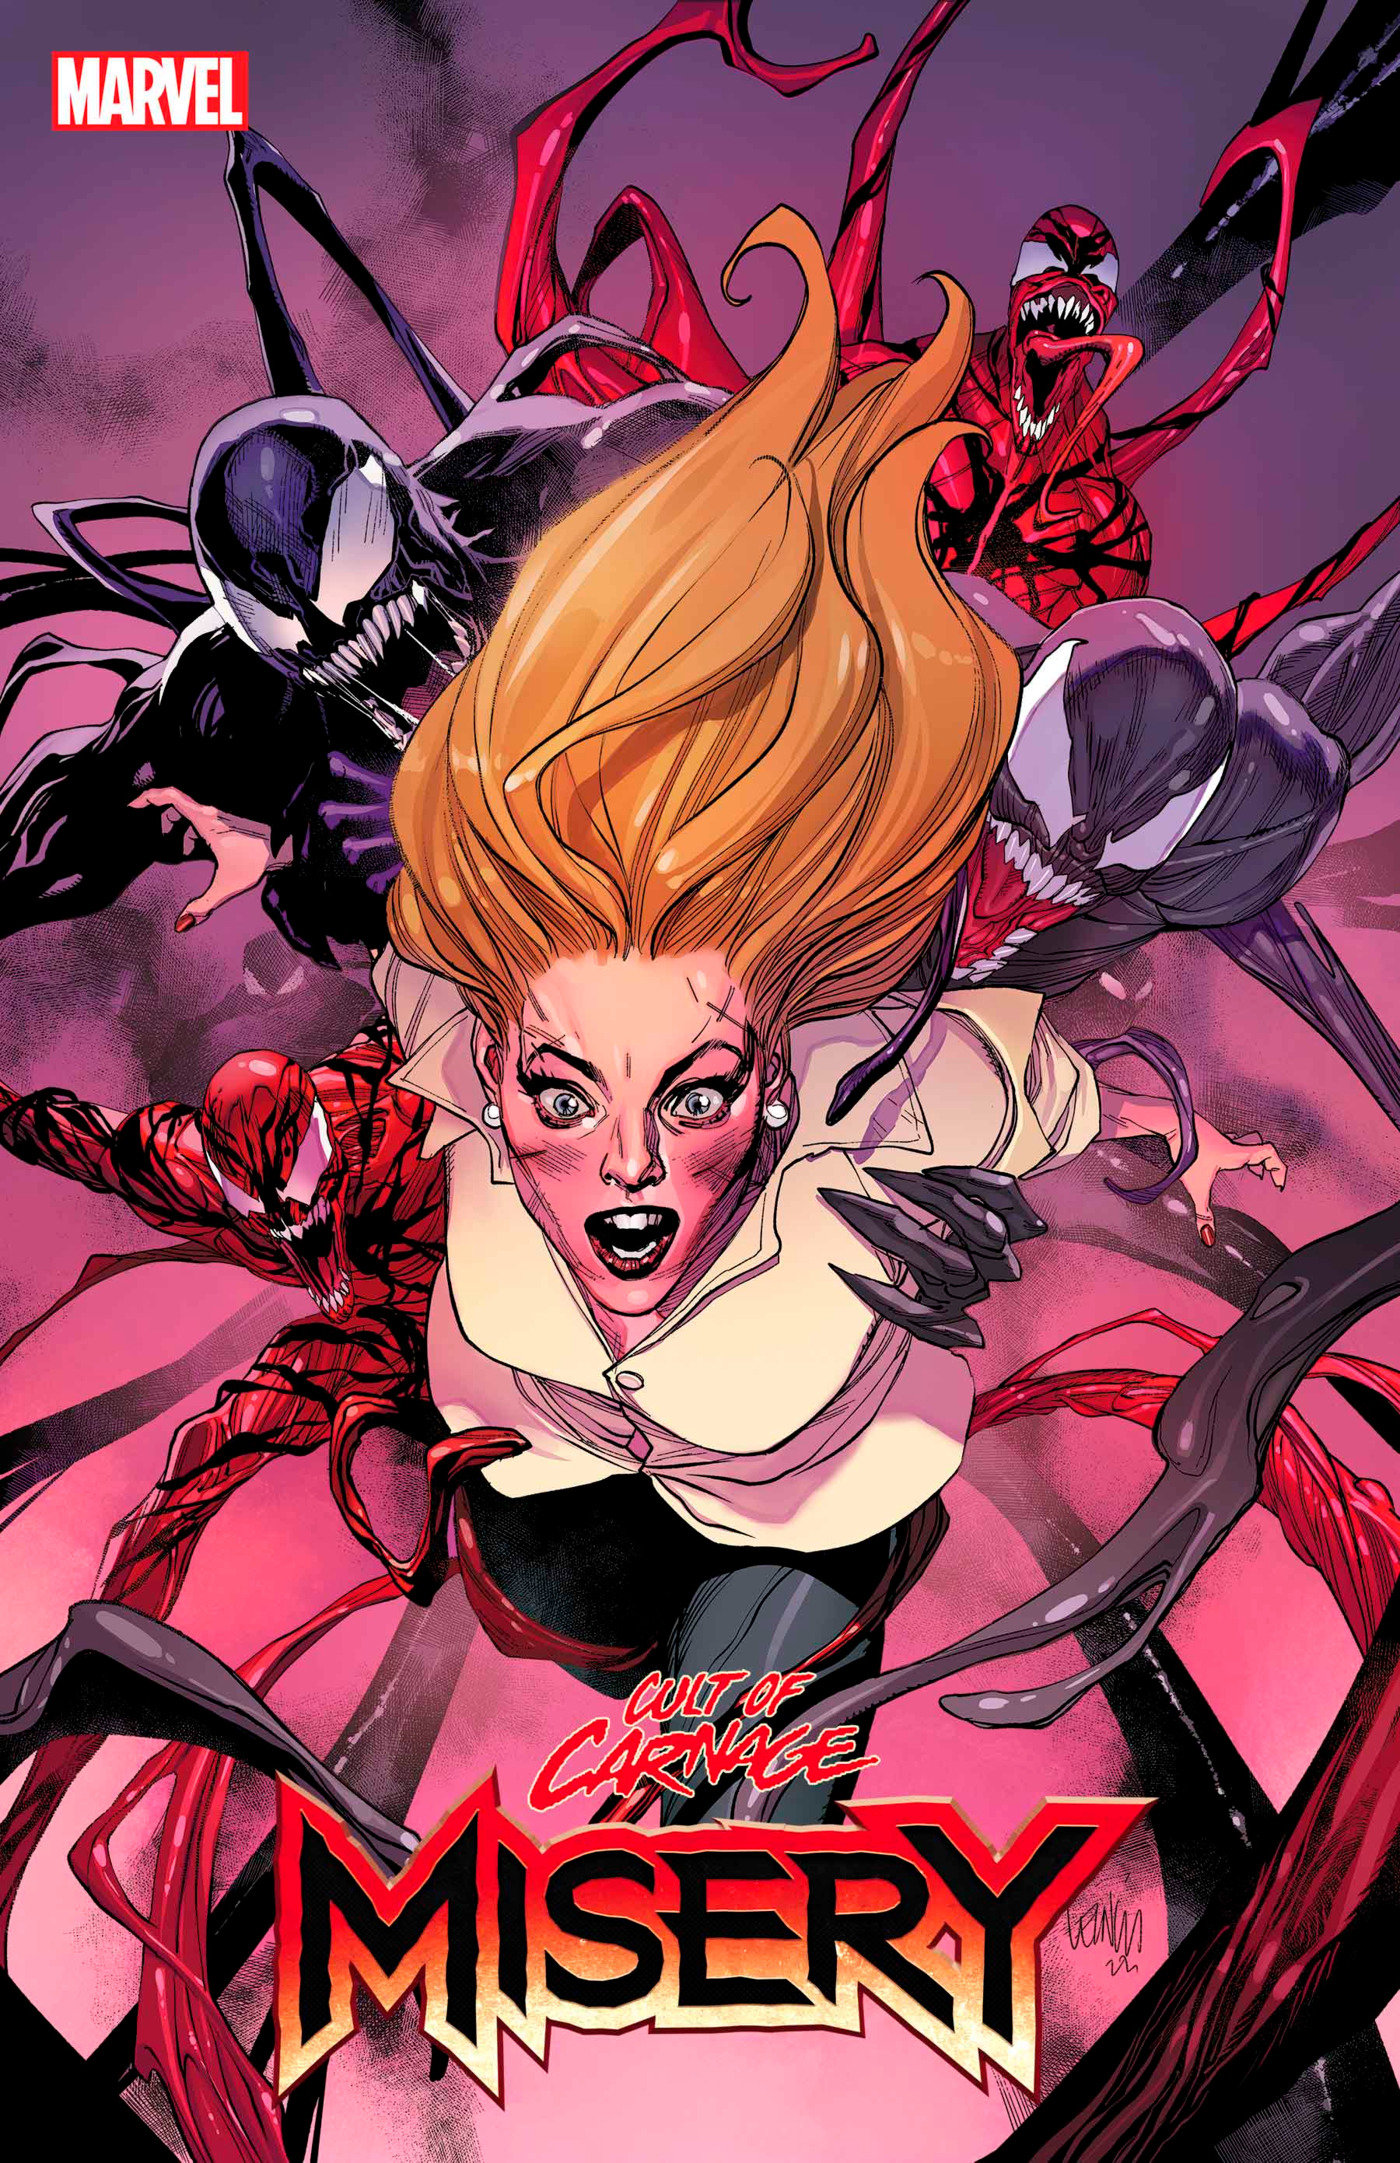 Cult of Carnage: Misery #1 1 for 25 Incentive Leinil Yu Variant